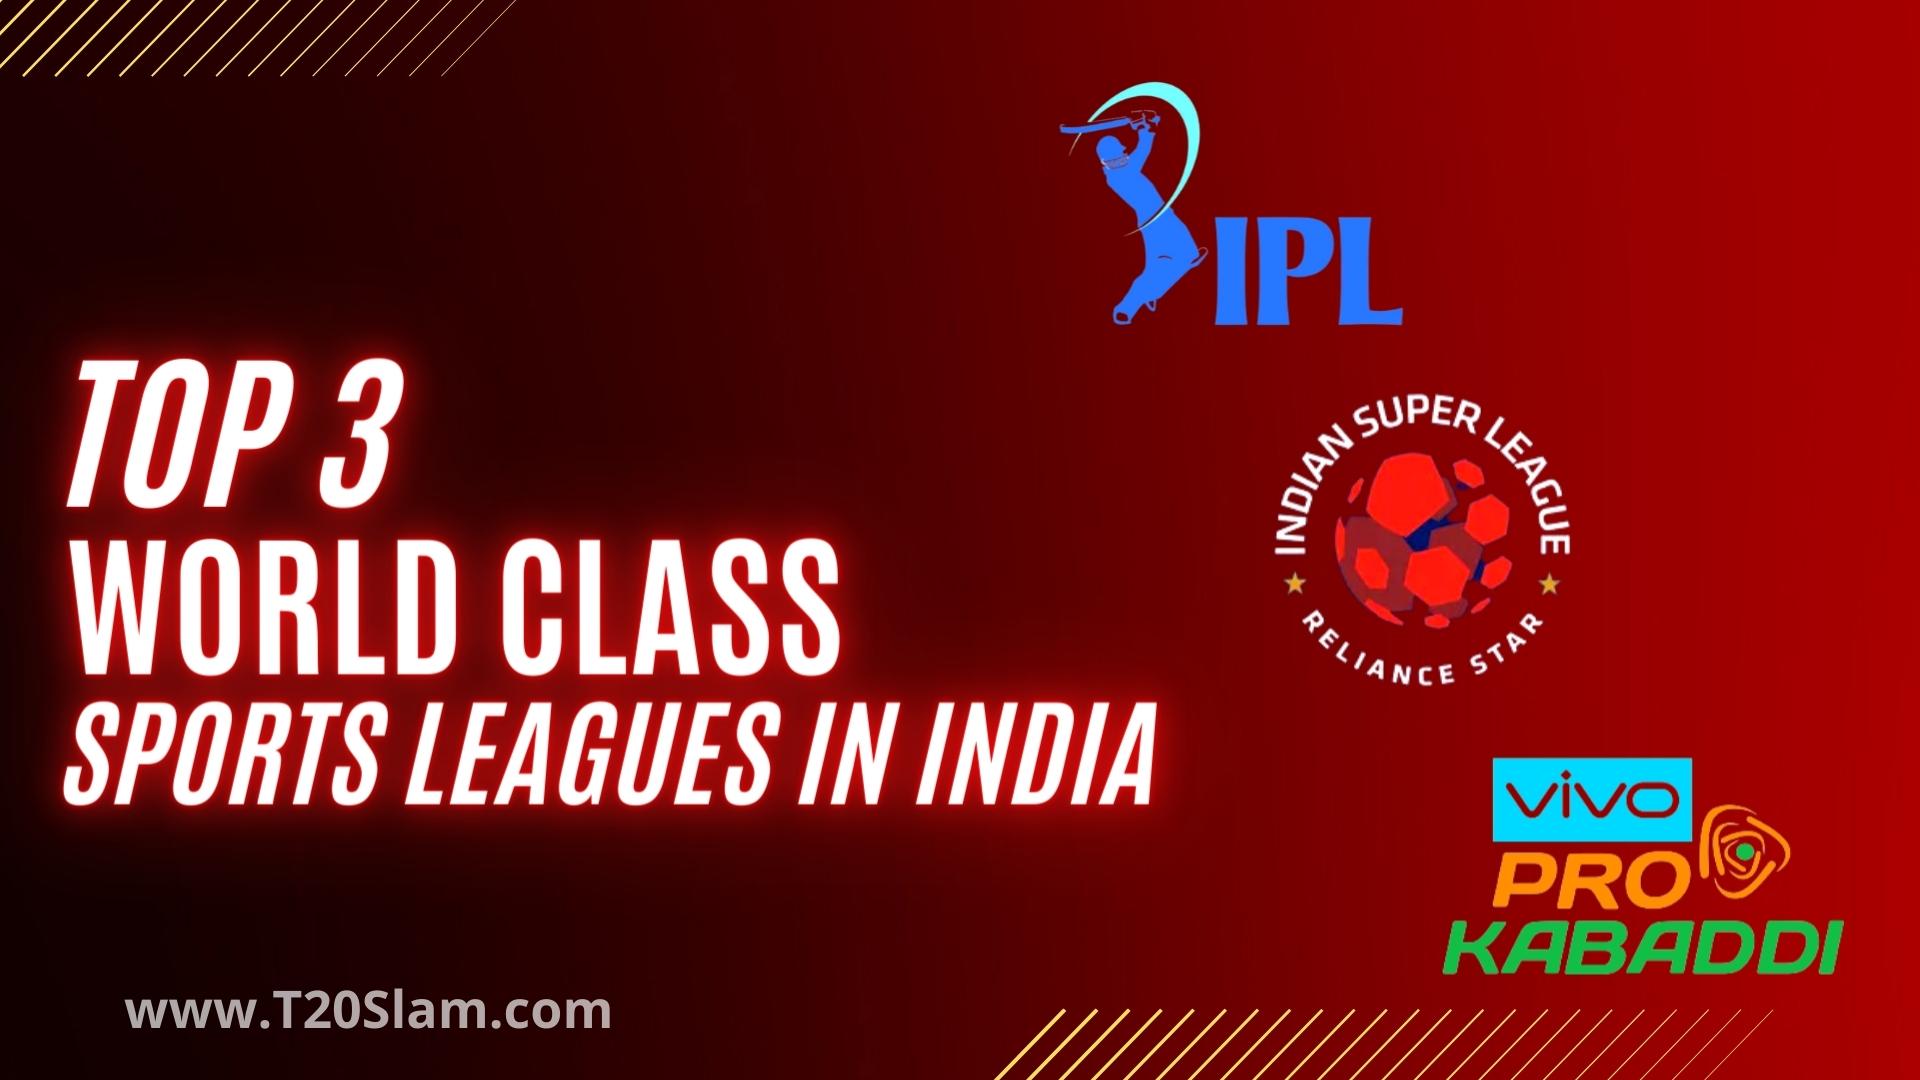 top 3 most popular, cash rich, and world class sports leagues in india